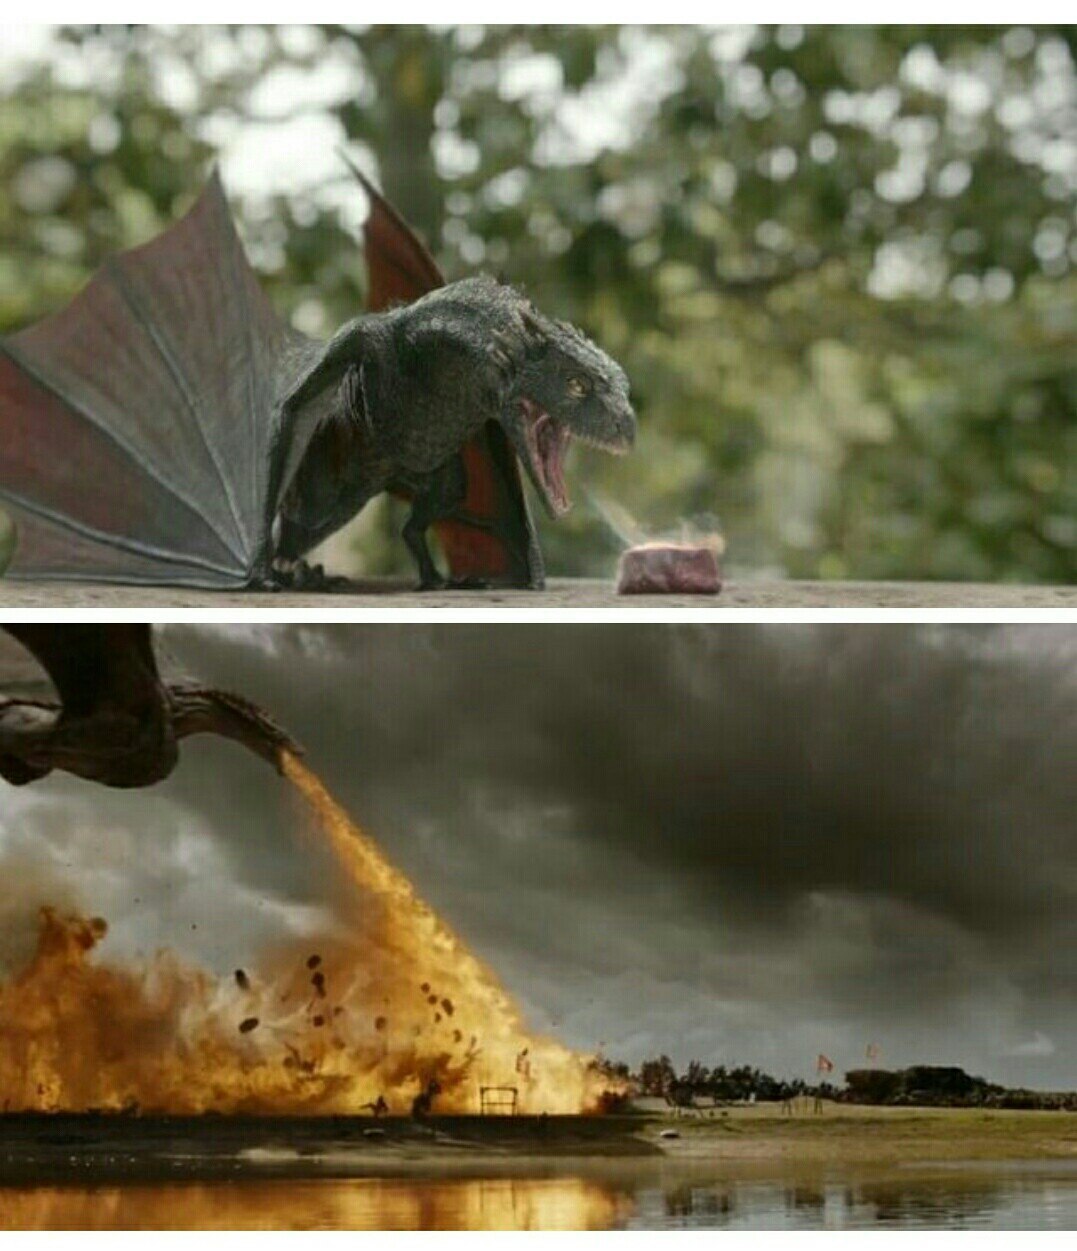 When the dragon budget was increased - Game of Thrones, Game of Thrones Season 7, Spoiler, Drogon, The Dragon, Budget